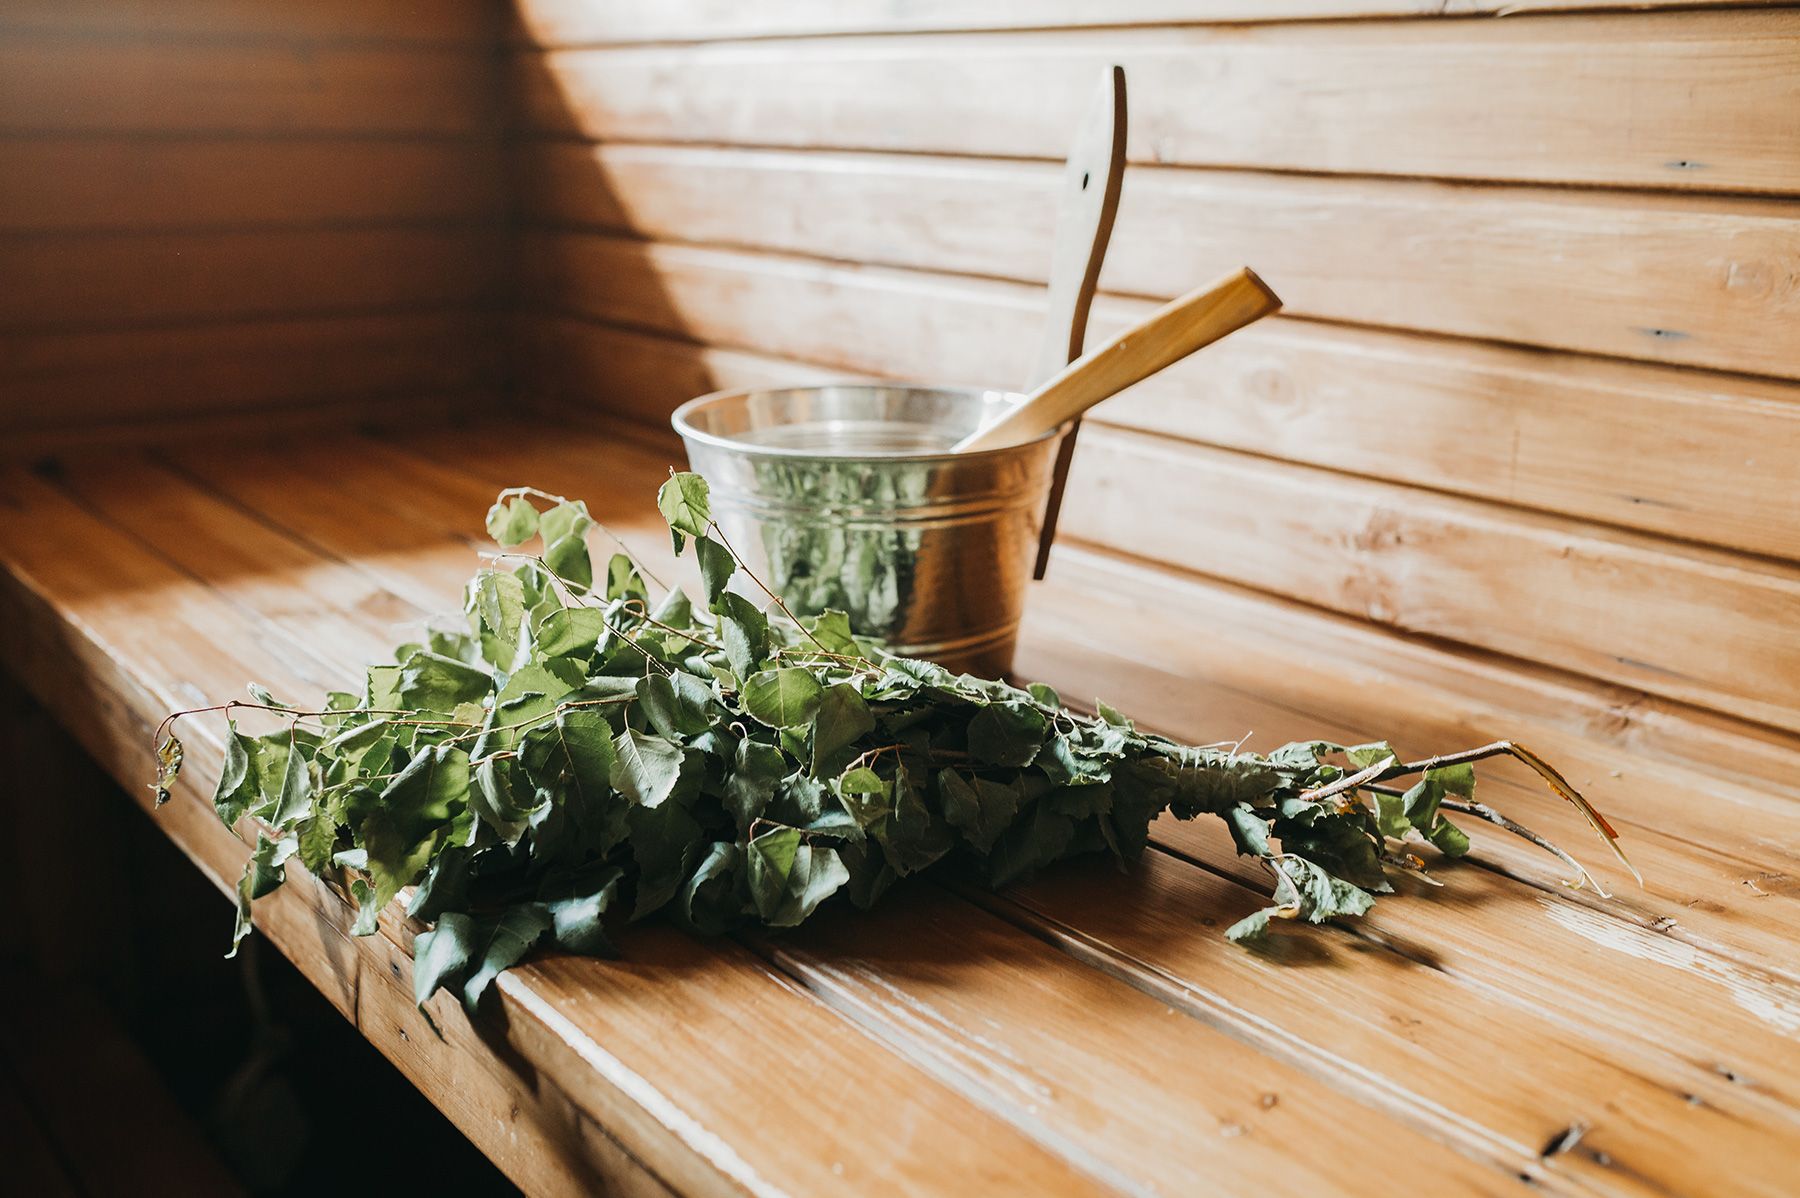 A bucket, ladle, and birch leaves on a bench inside a sauna.